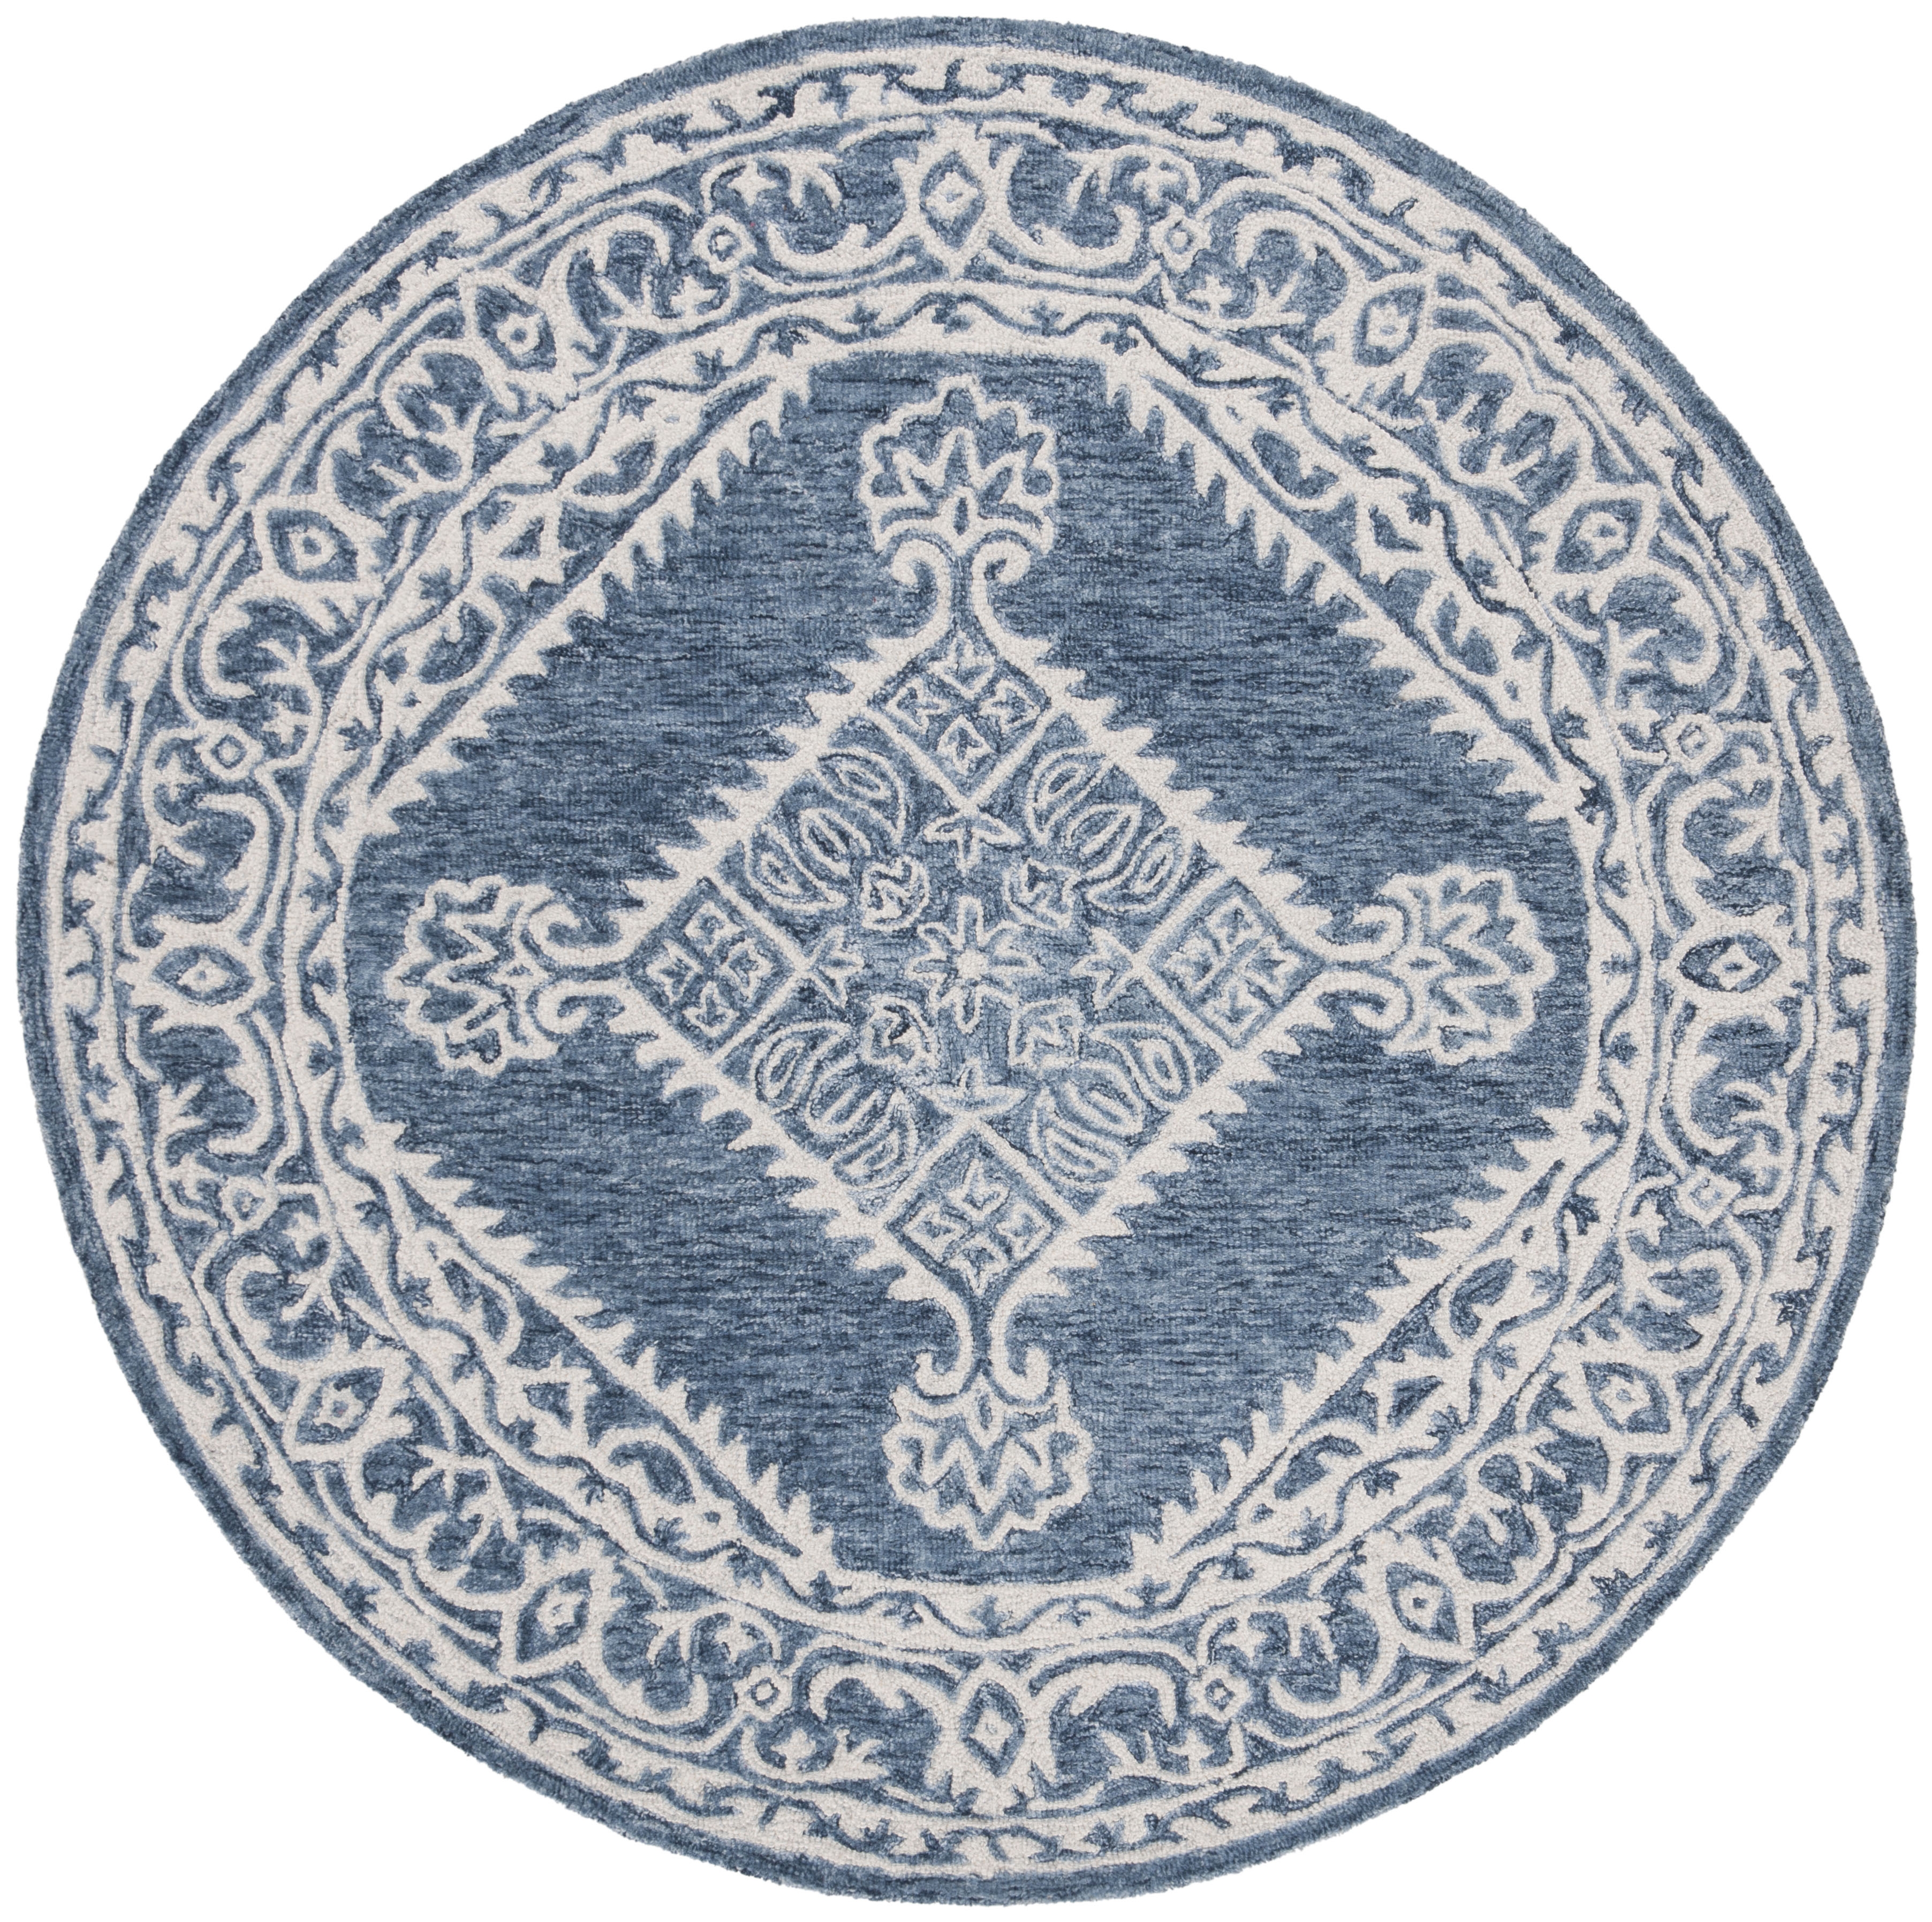 Arlo Home Hand Tufted Area Rug, MLP605M, Blue/Ivory,  5' X 5' Round - Image 0